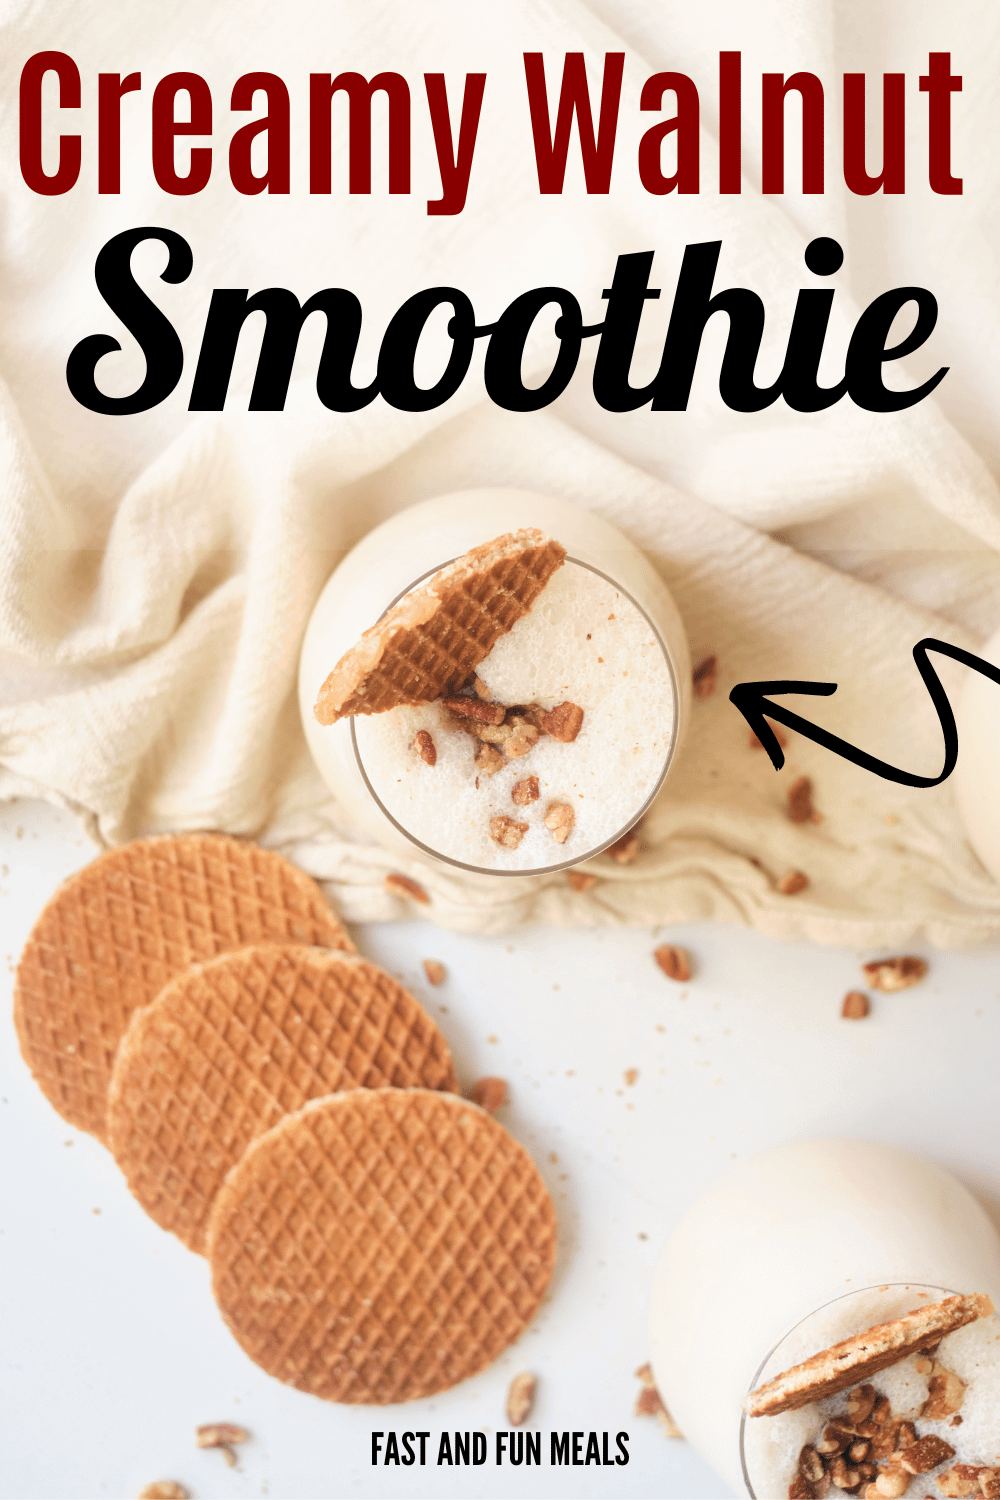 creamy walnut smoothie with crushed walnuts on top